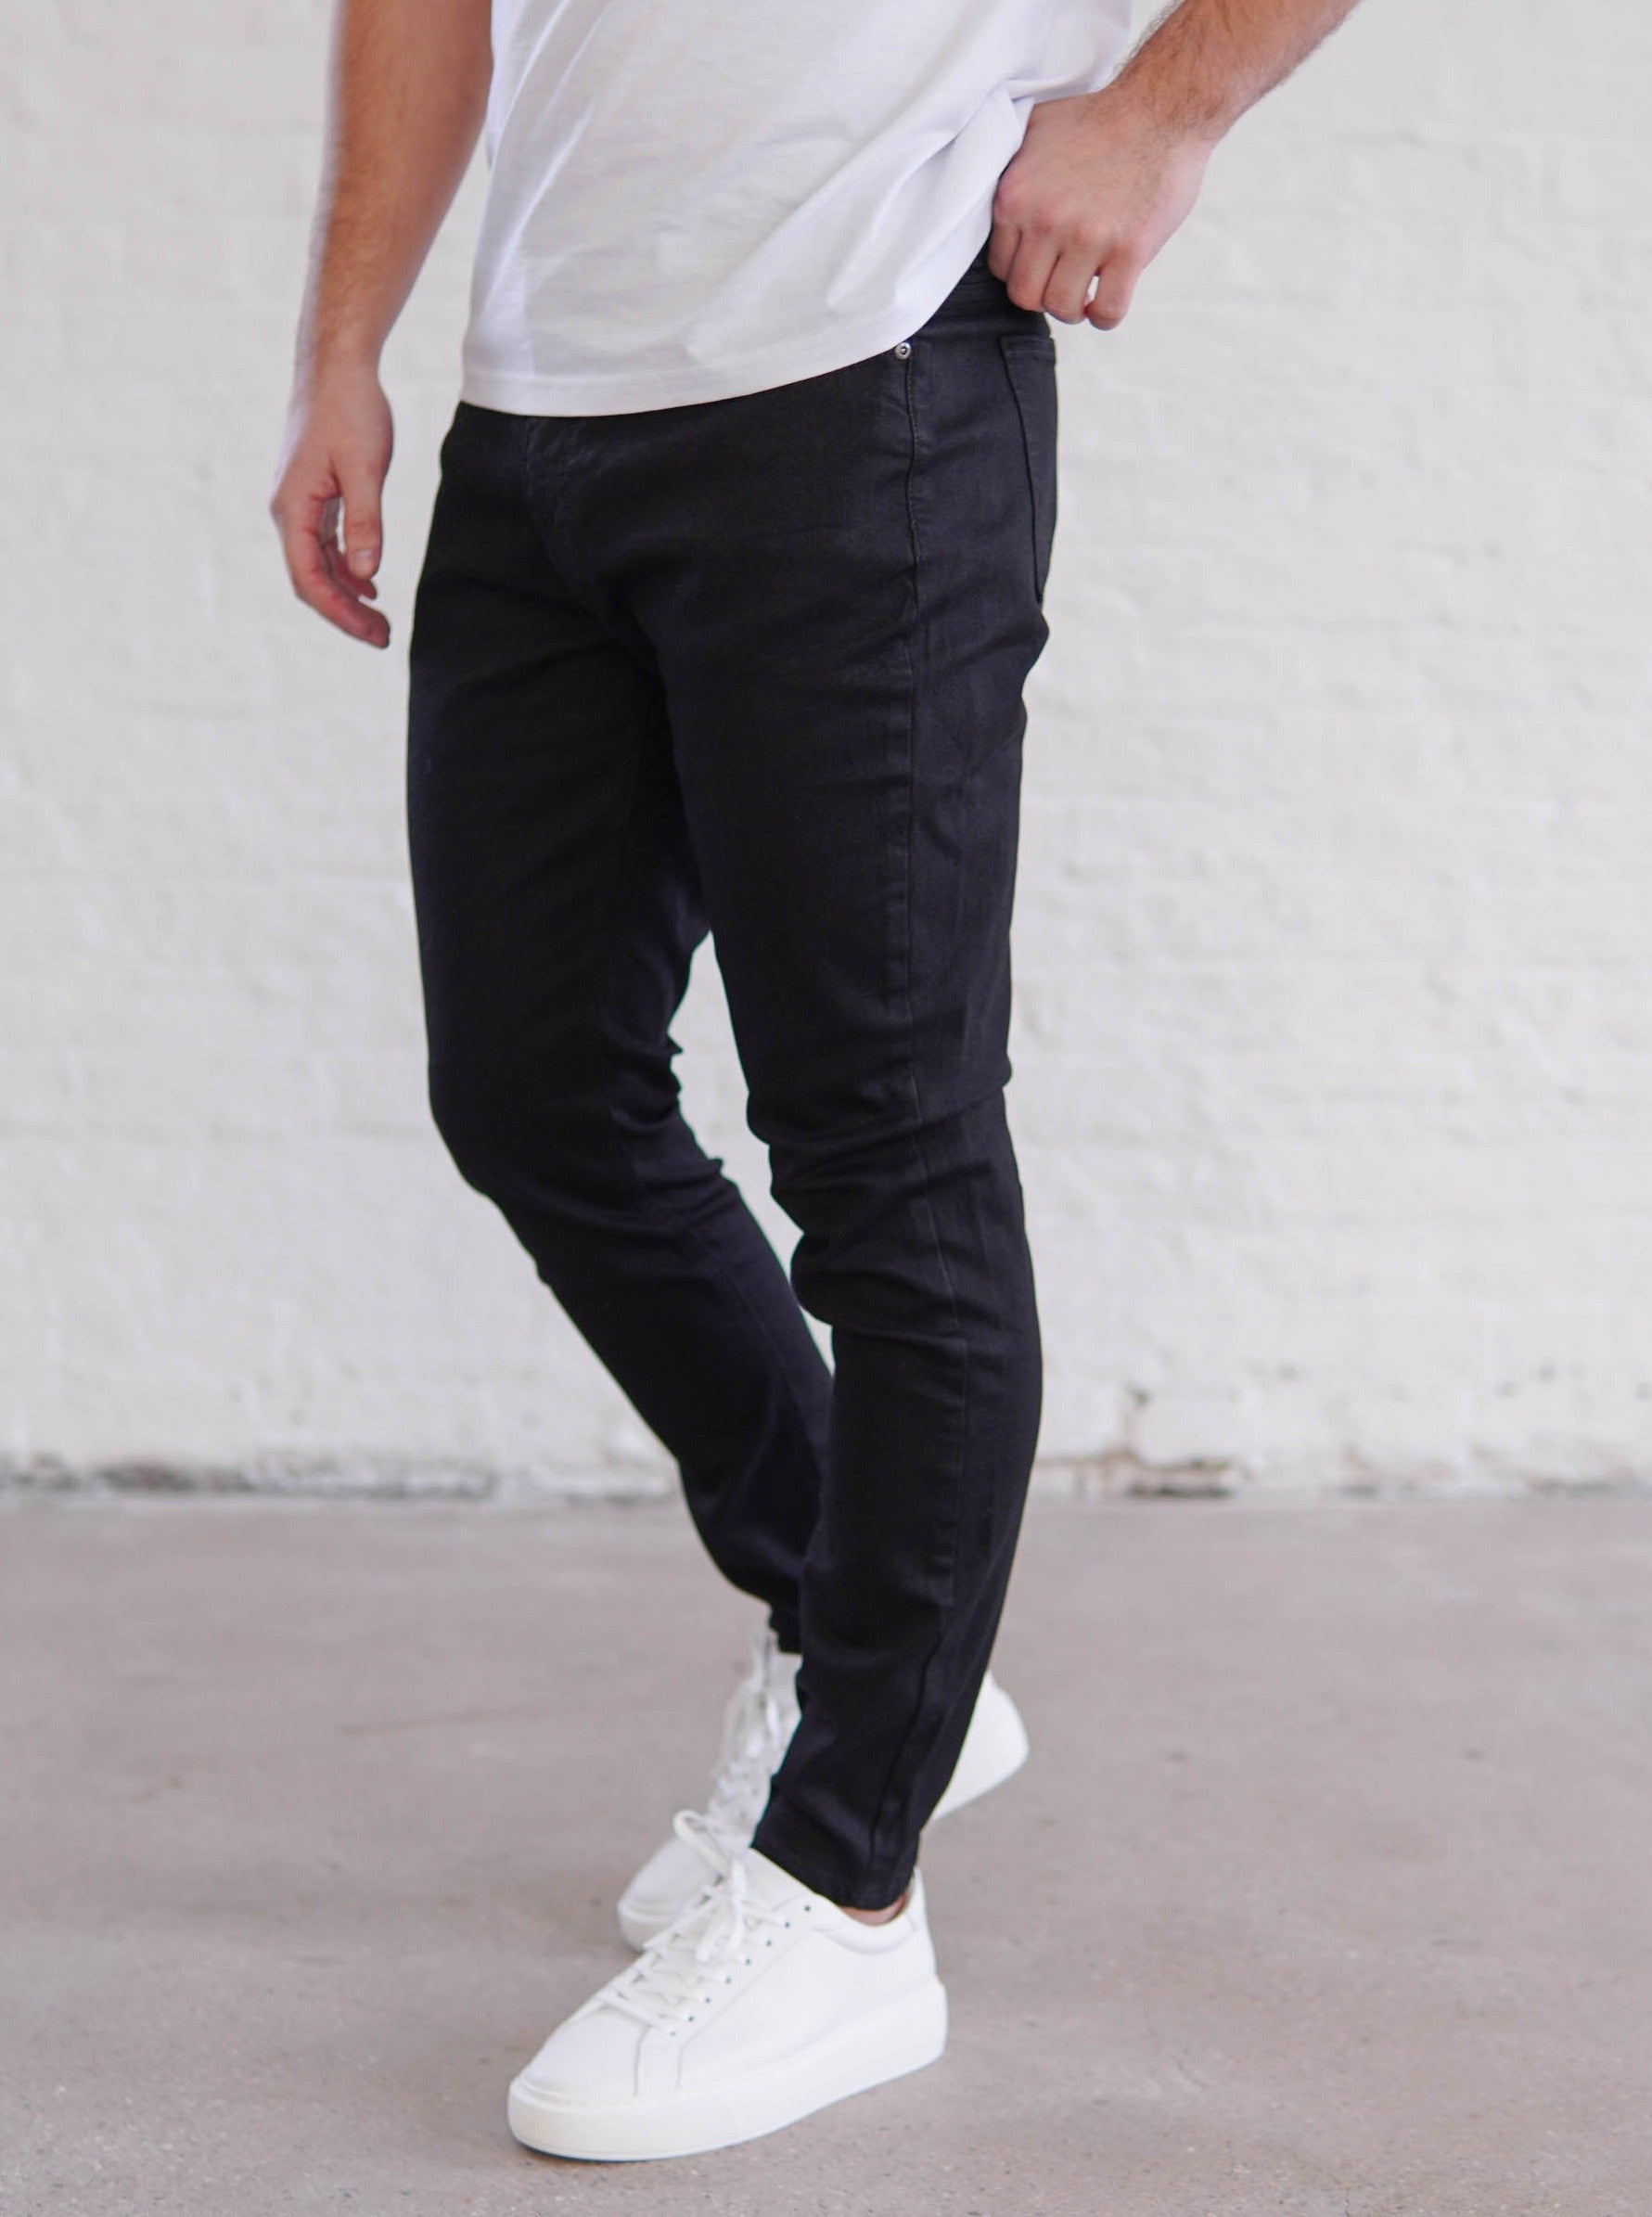 Slim Comfort Jeans In Charcoal